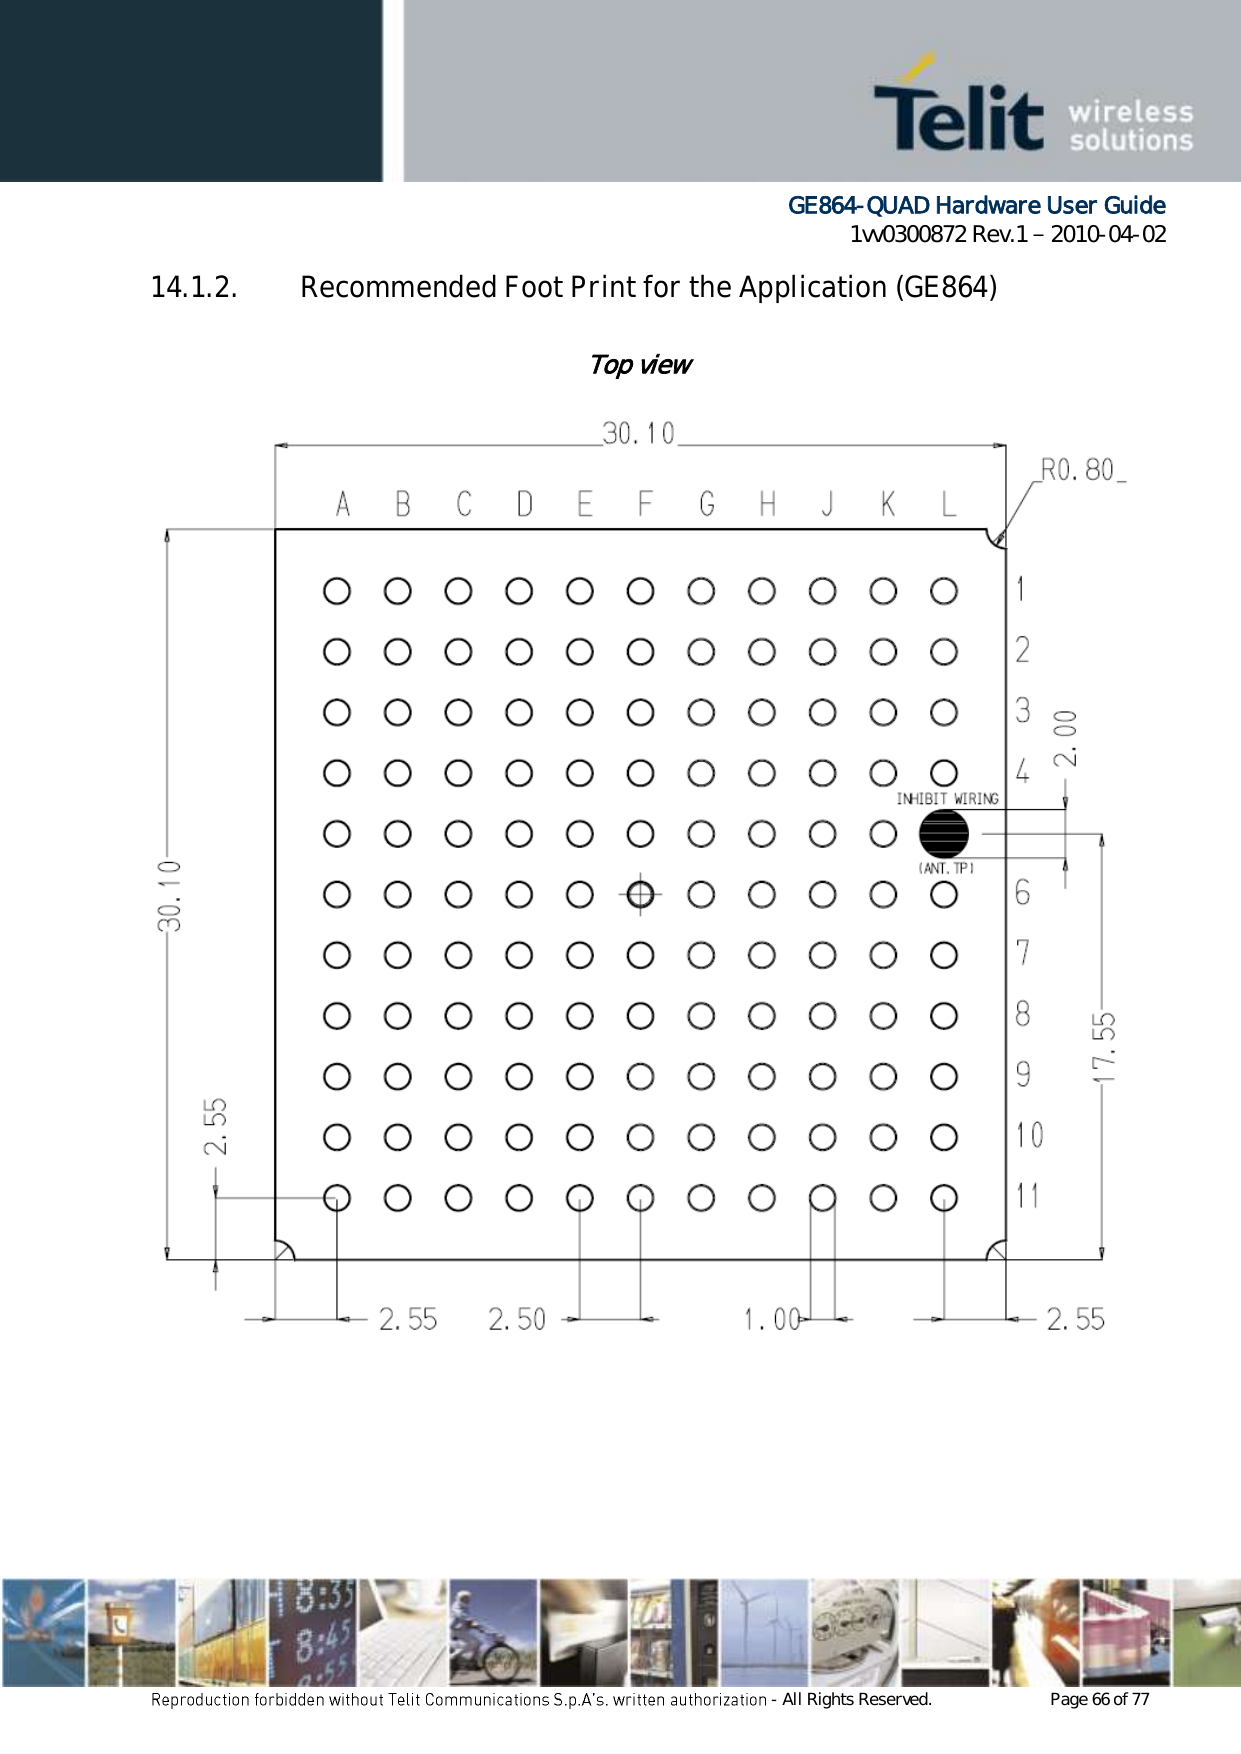      GE864-QUAD Hardware User Guide 1vv0300872 Rev.1   2010-04-02 - All Rights Reserved.    Page 66 of 77  14.1.2. Recommended Foot Print for the Application (GE864)    Top view  